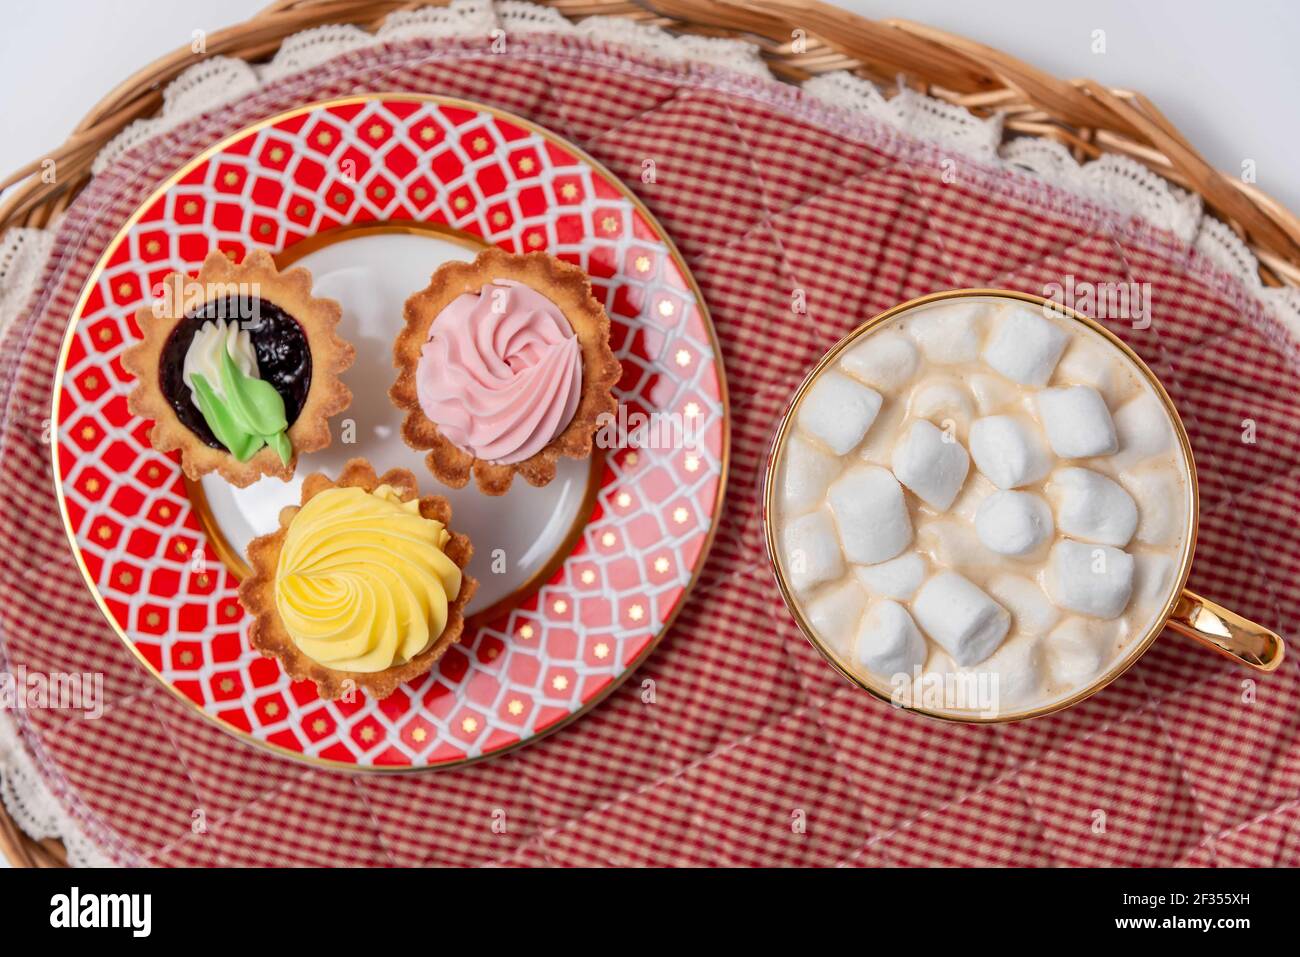 Tasty cupcakes and cup of cocoa with marshmallows on wicker tray, vanilla cupcakes with pink and yellow cream. Stock Photo